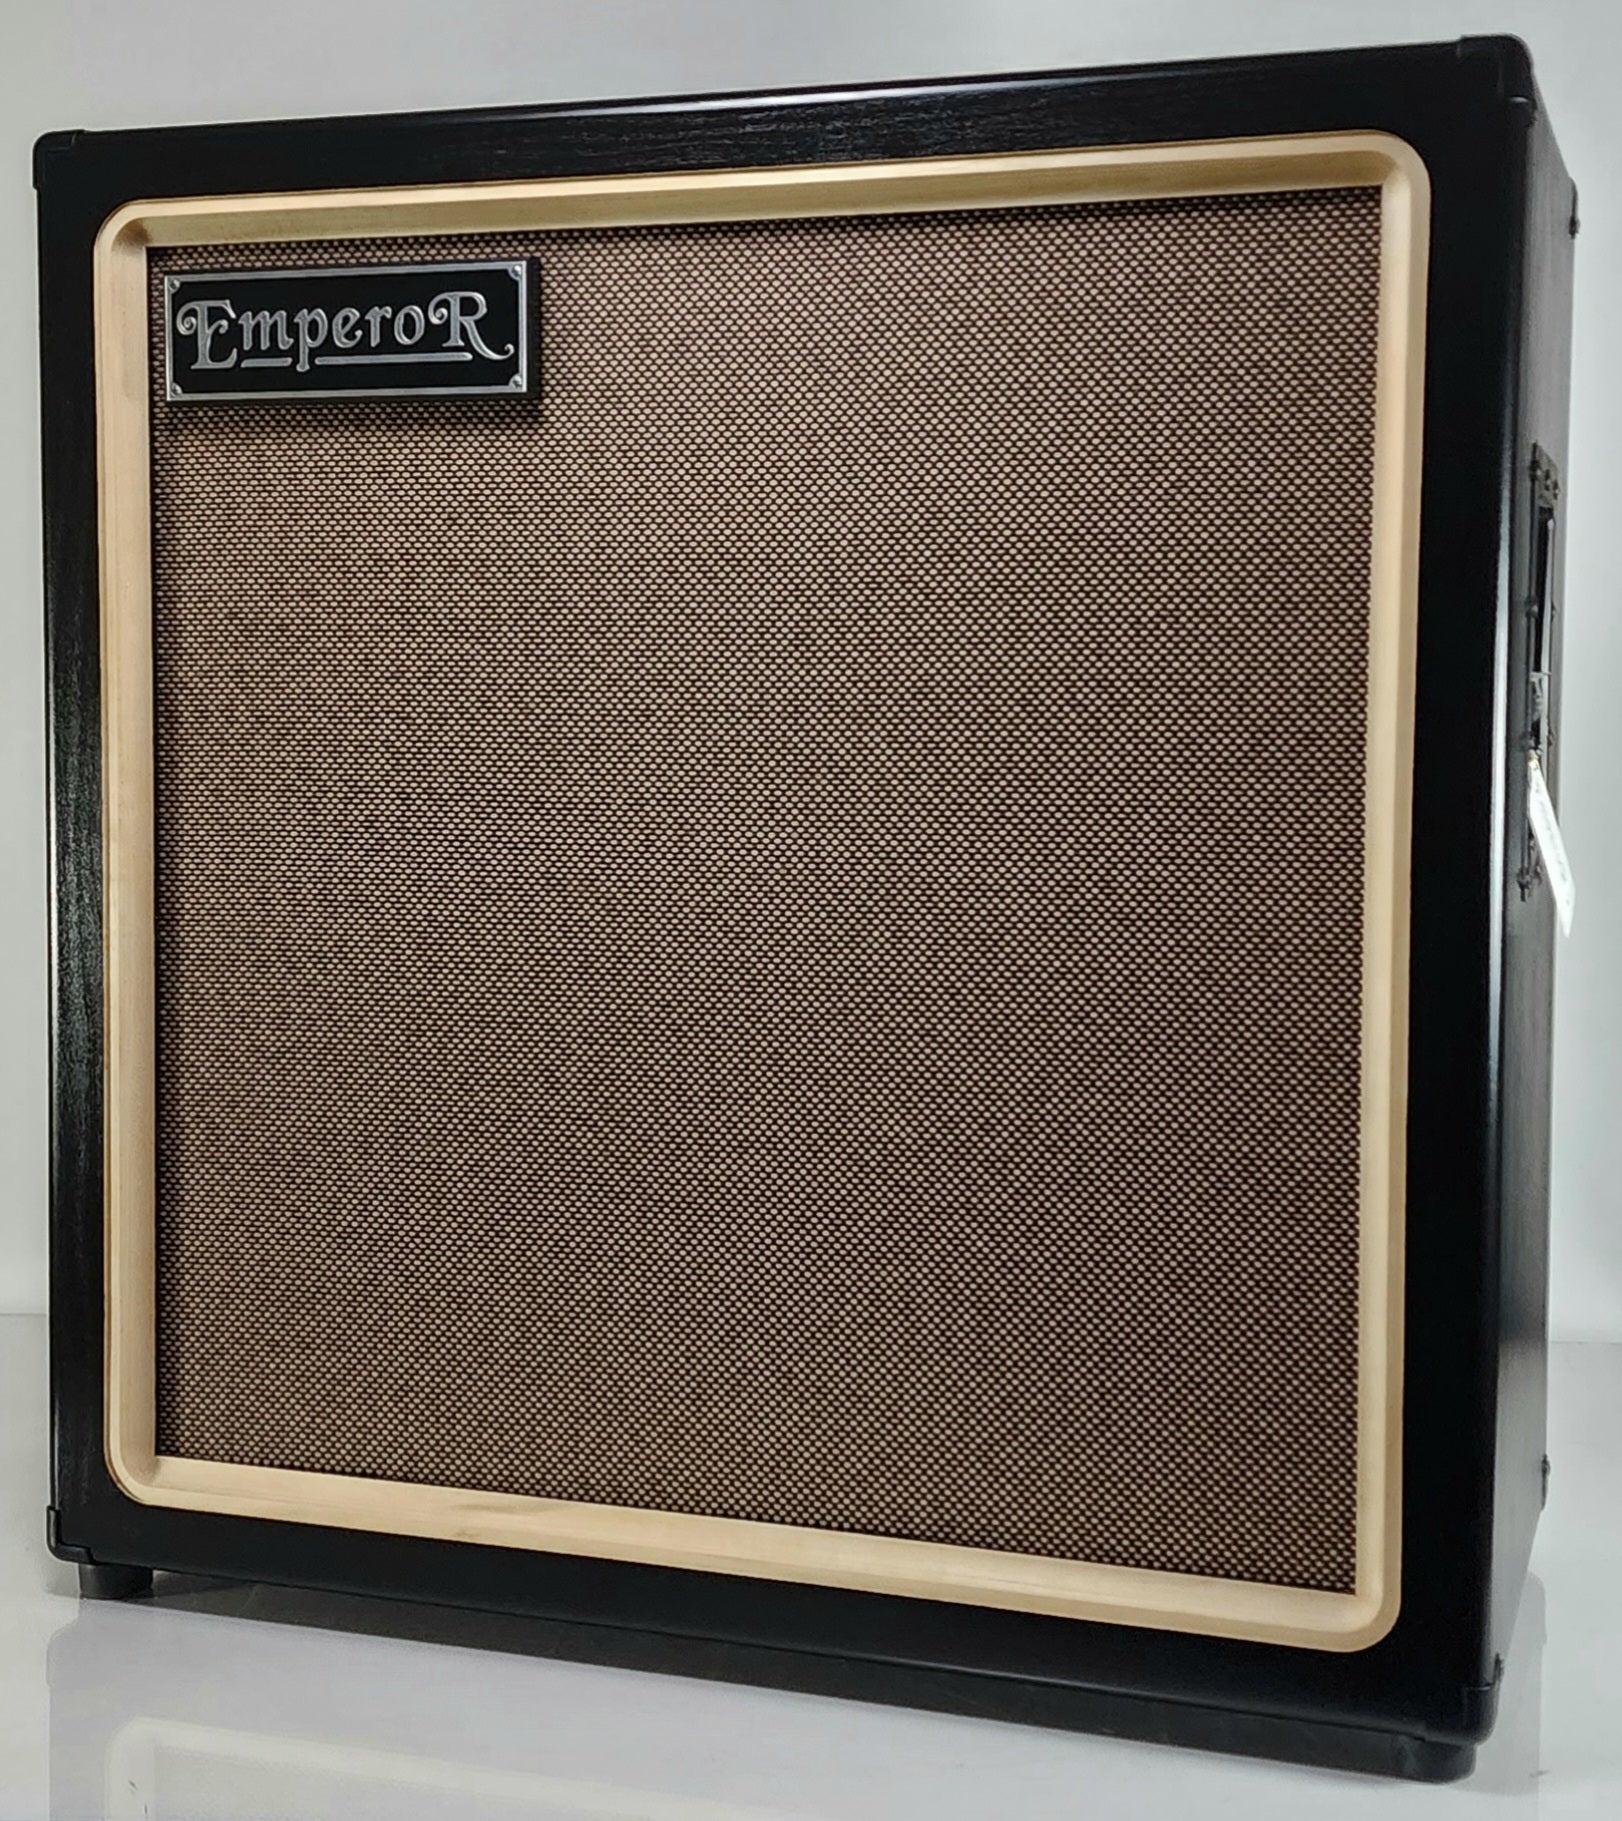 Blackened 2x15 SS Guitar Cabinet - Emperor Cabinets